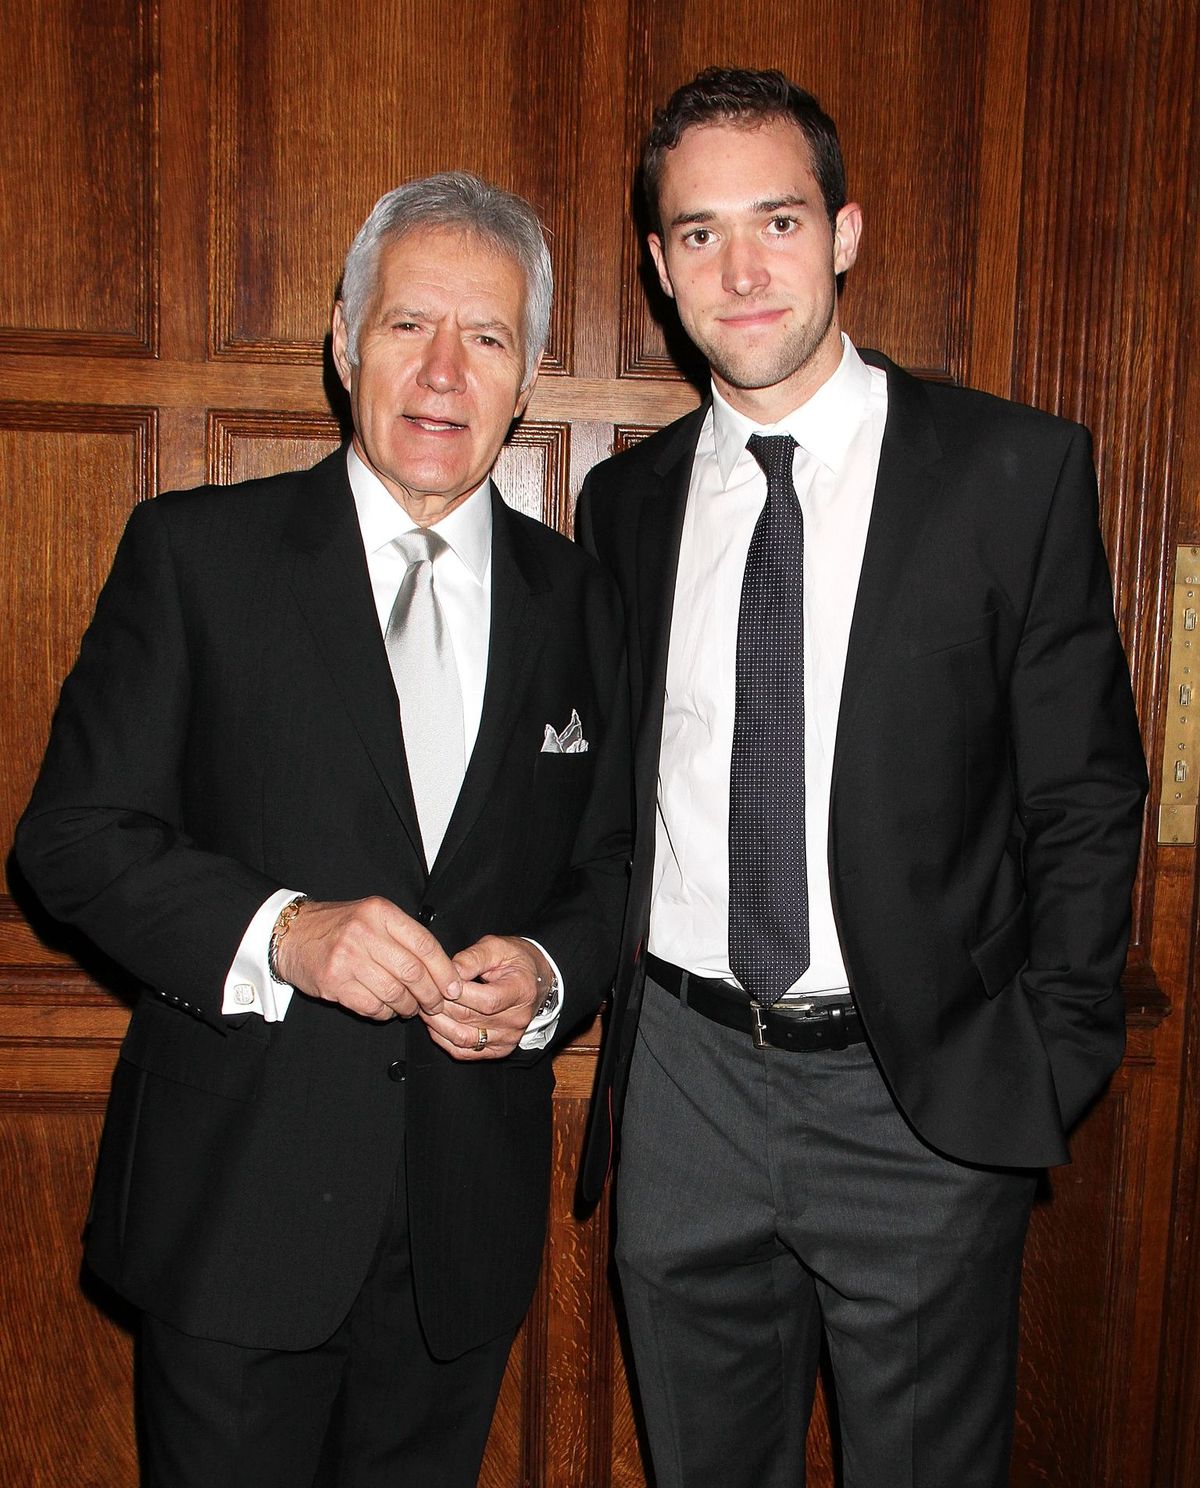 Alex and Matthew Trebek at the 11th annual Giants of Broadcasting Honors on October 16, 2013, in New York City | Photo: Laura Cavanaugh/FilmMagic/Getty Images